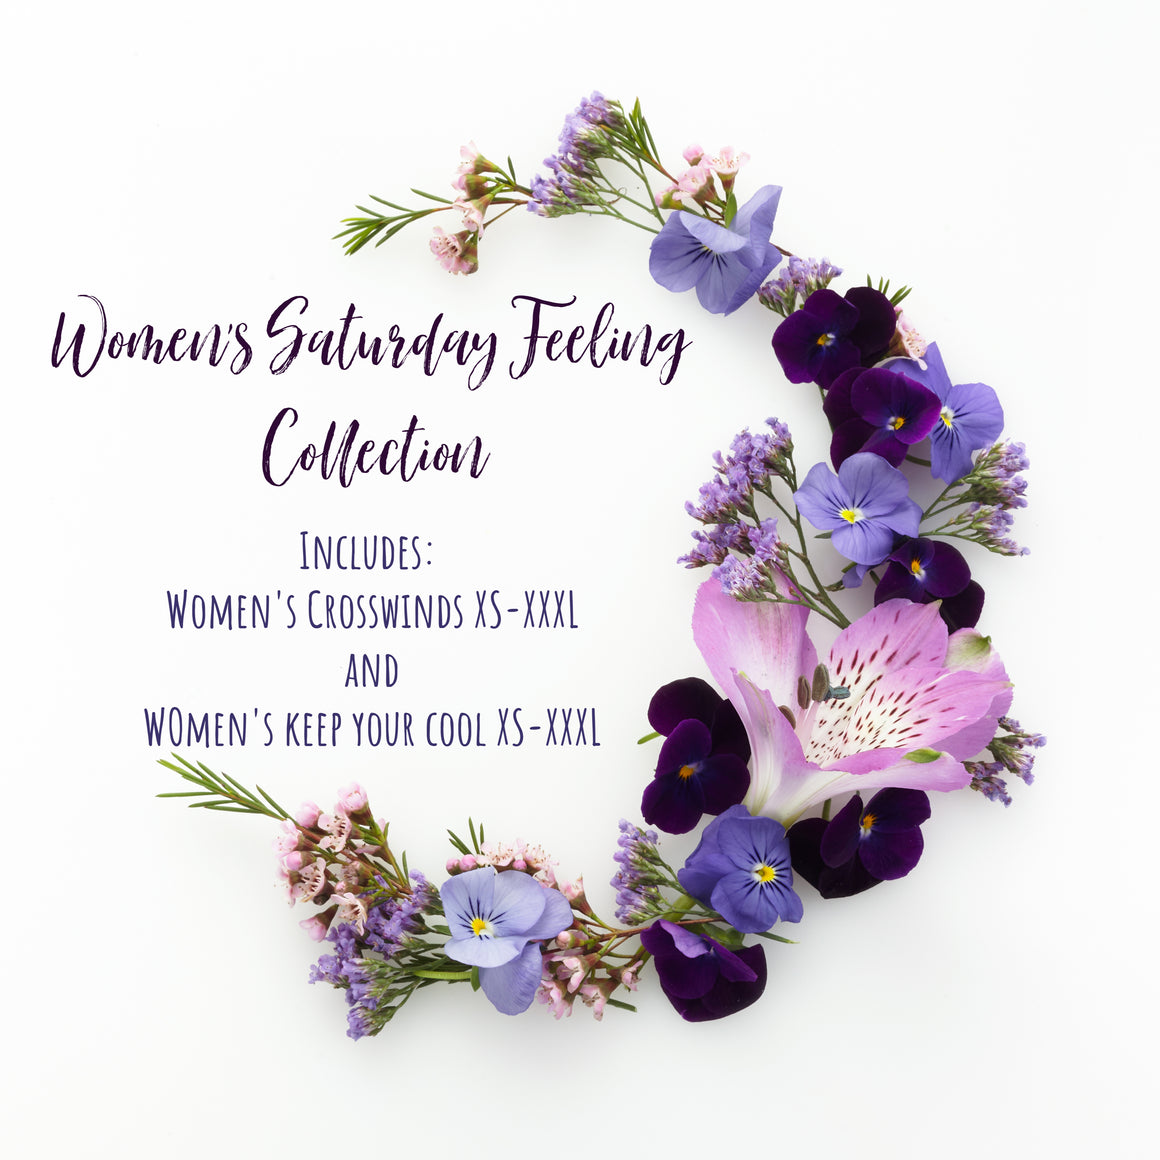 Women's Saturday Feeling Collection